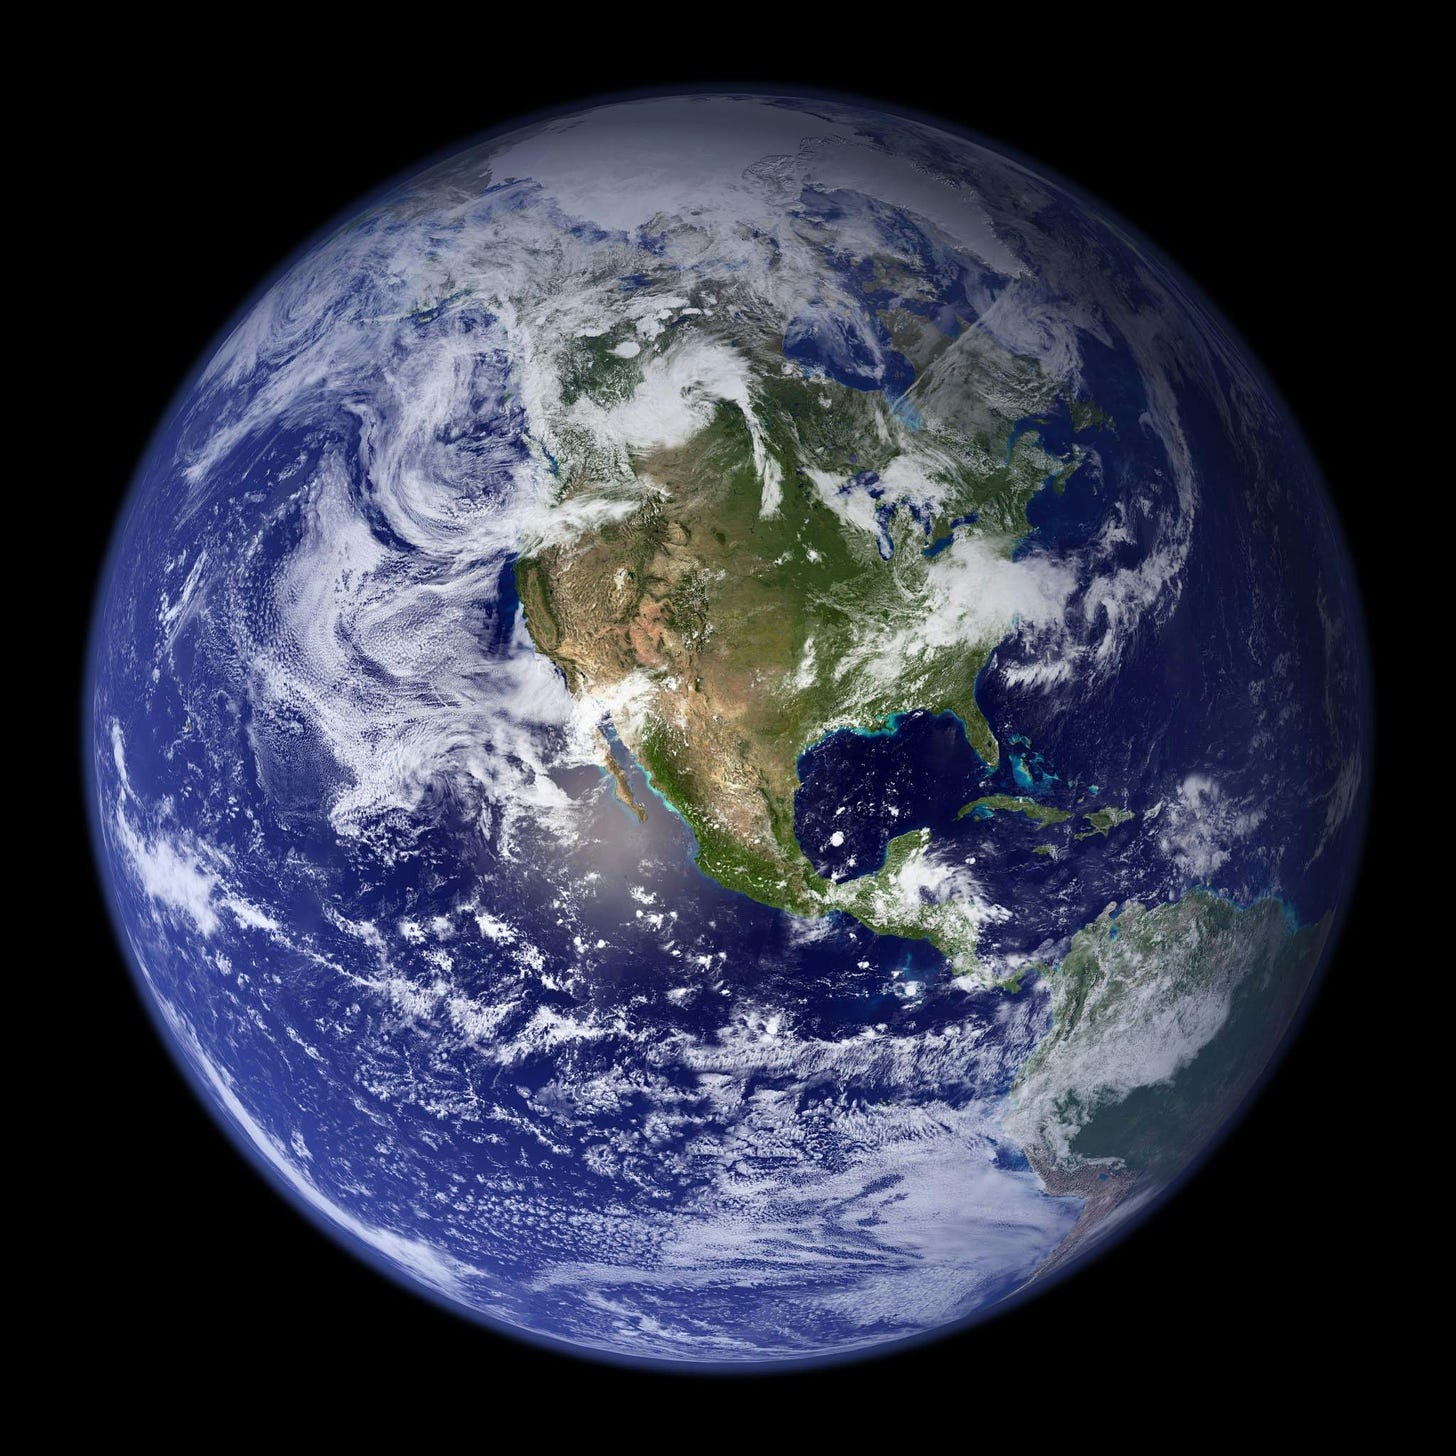 A photo of the Earth as seen from space, showing the continent of North America in the foreground on the blue planet, surrounded by swirling white clouds. 